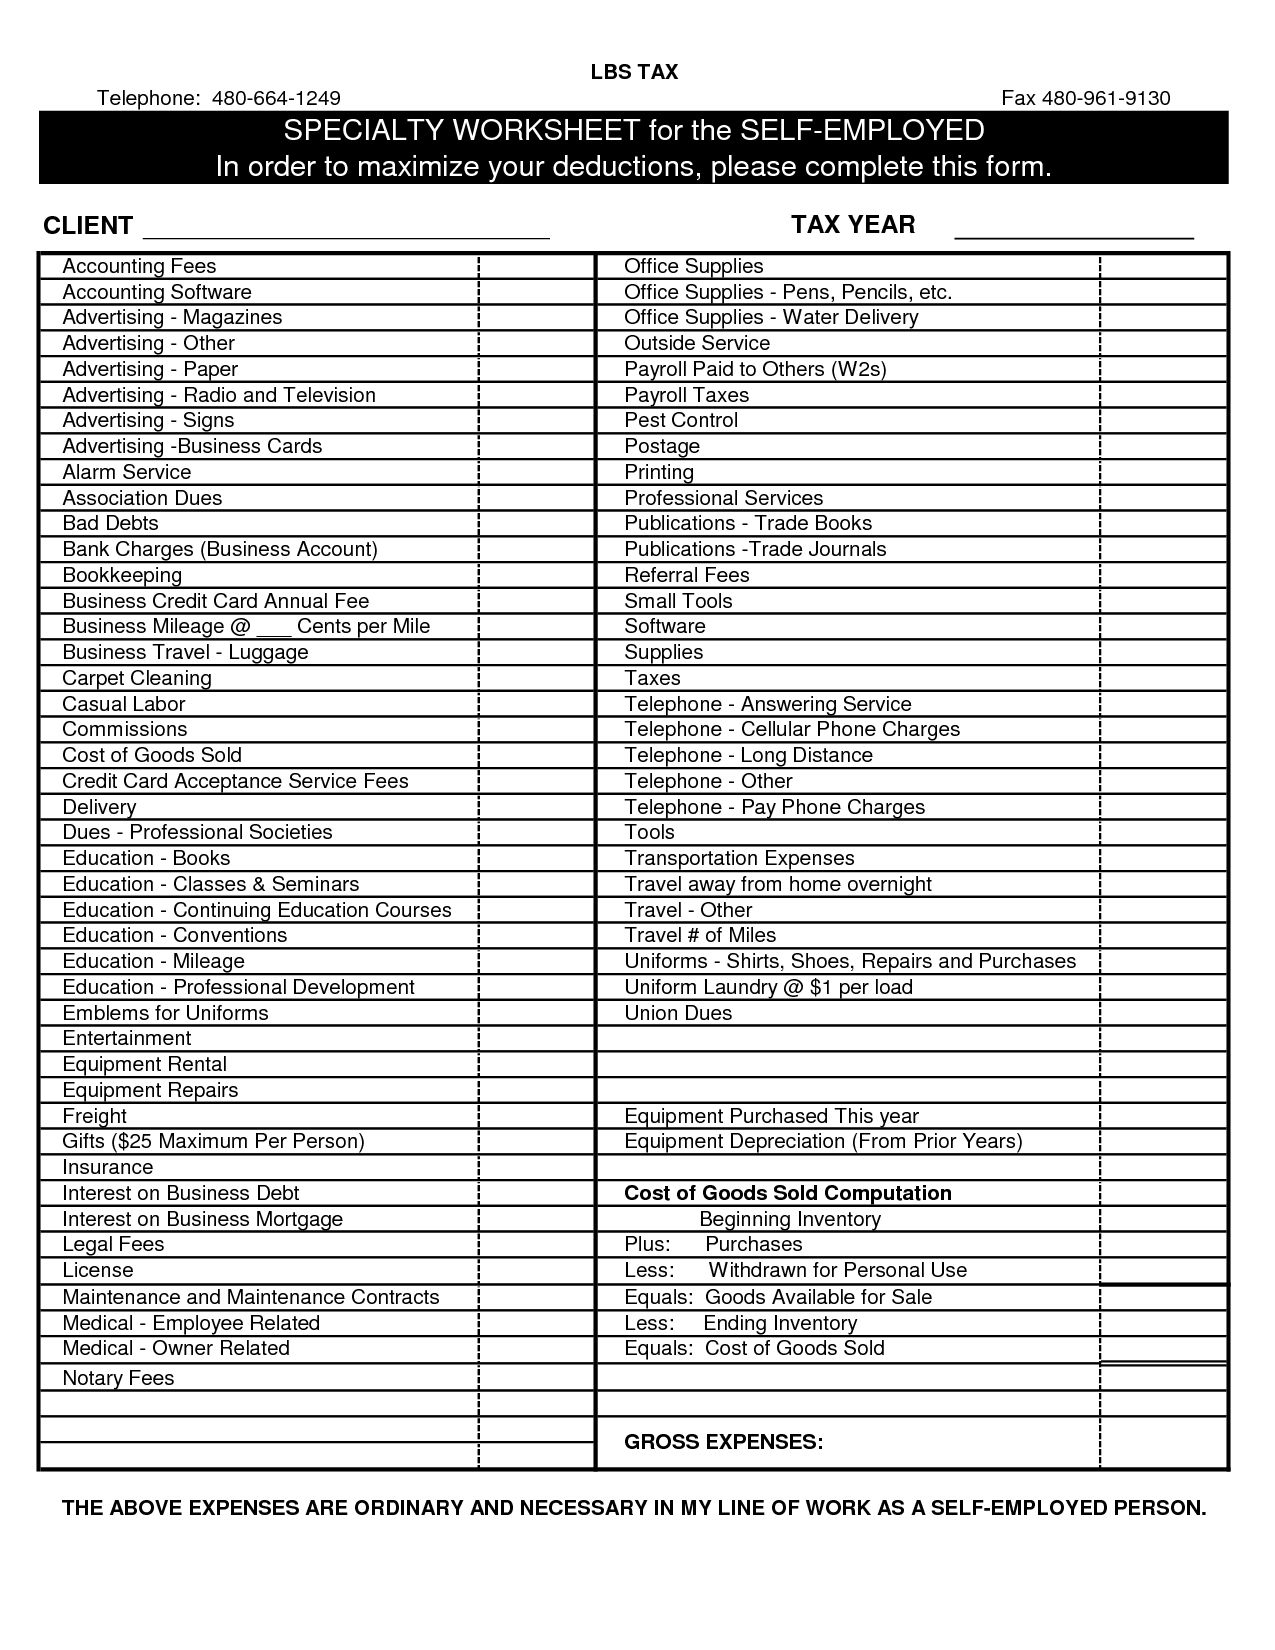 2016 Self Employment Tax And Deduction Worksheet Db excel